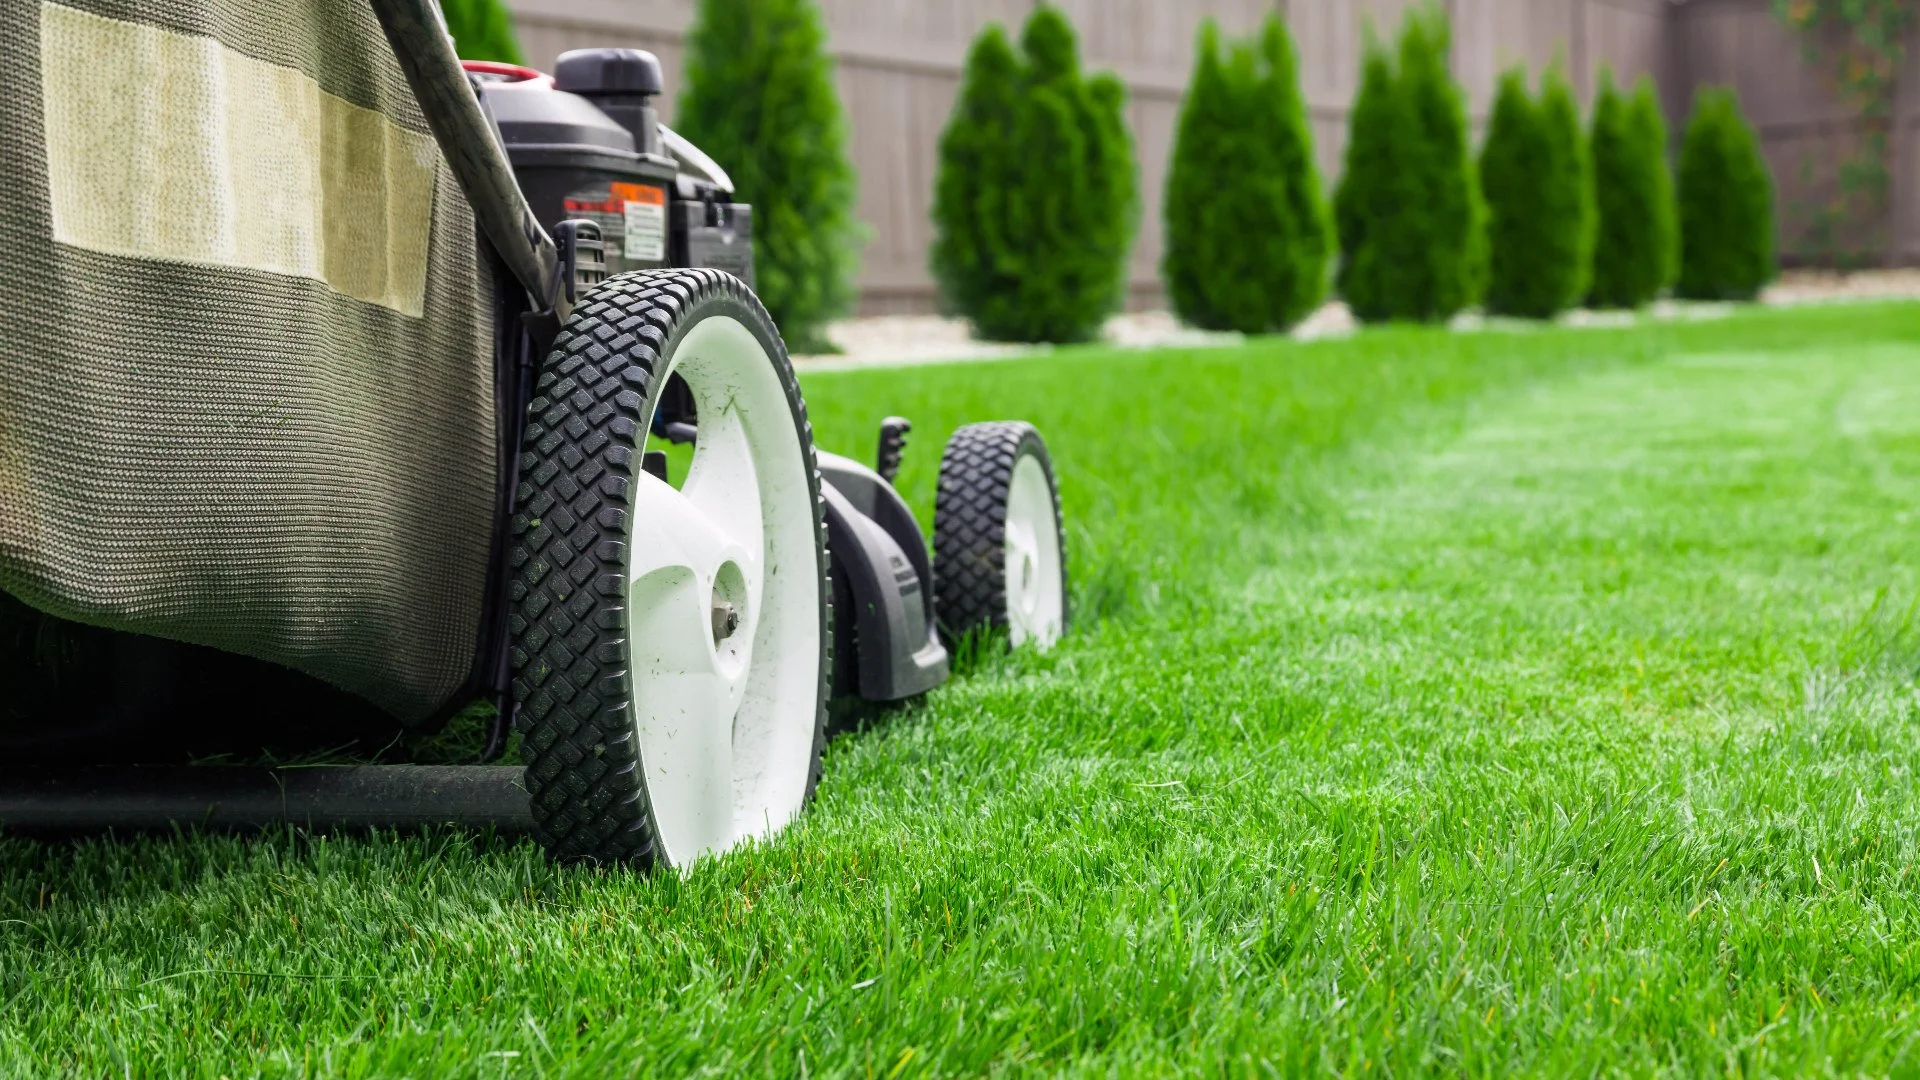 Mulching vs Bagging - What Should I Do With the Grass Clippings After Mowing?